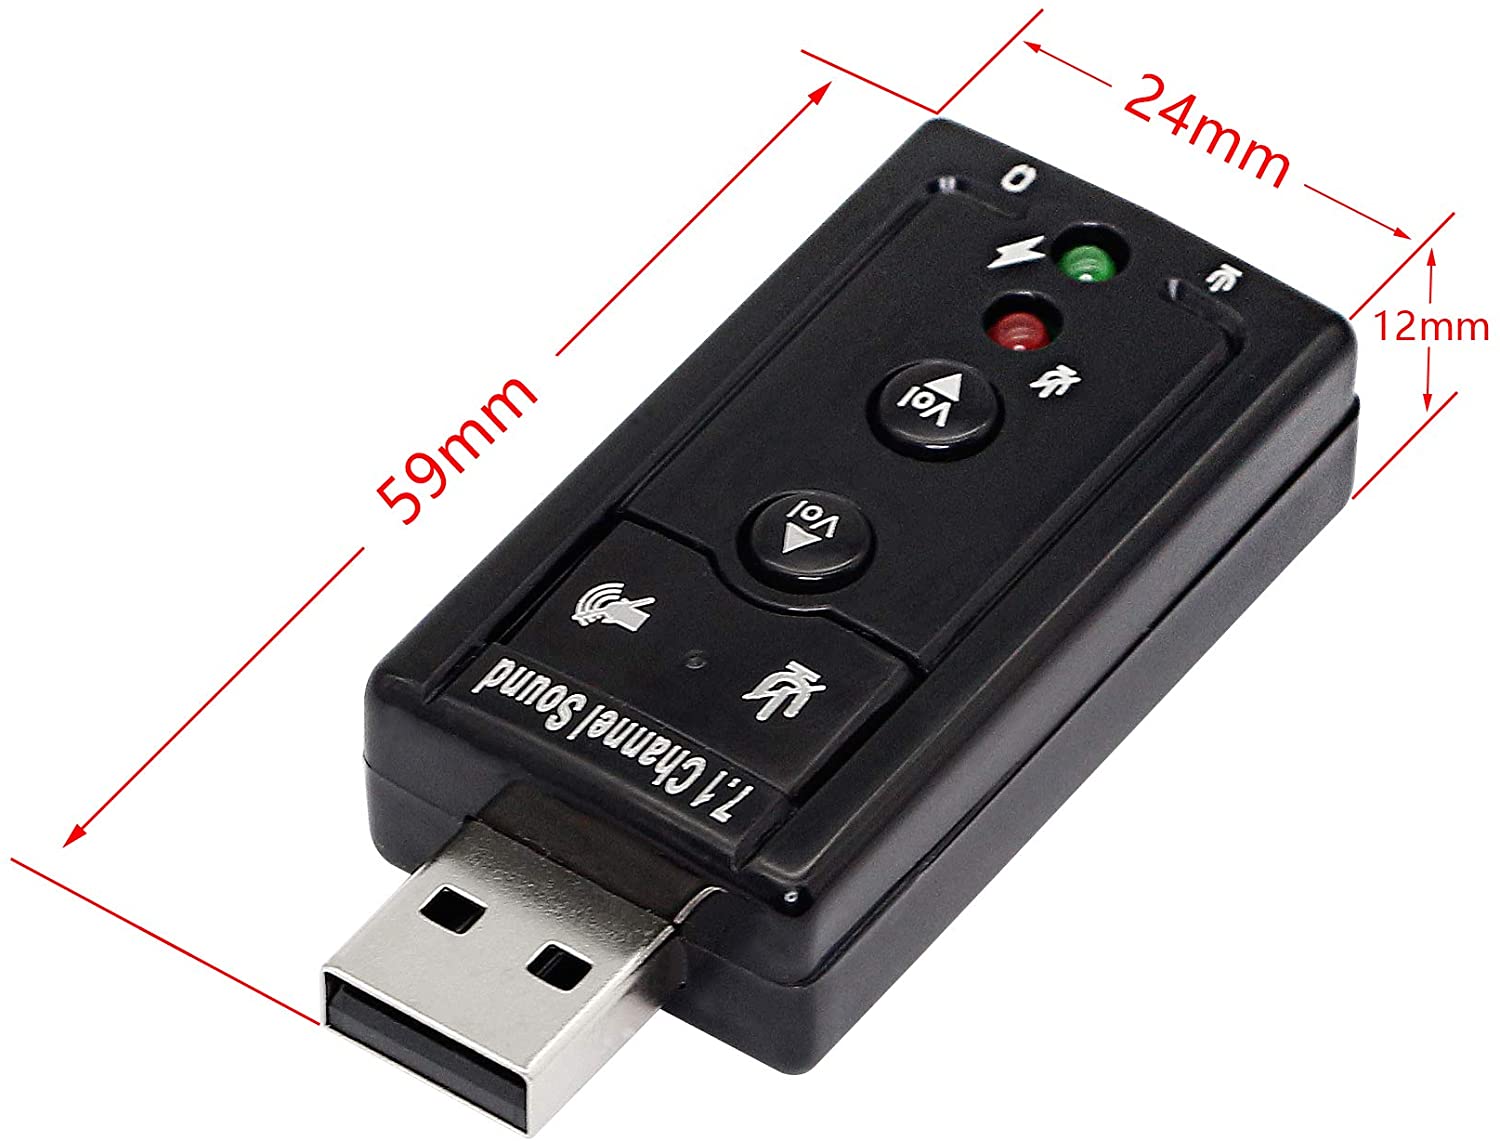 7.1 USB Stereo Audio Adapter External Sound Card - Sound card - stereo - USB 2.0 - ICUSBAUDIO7,Black - image 4 of 6